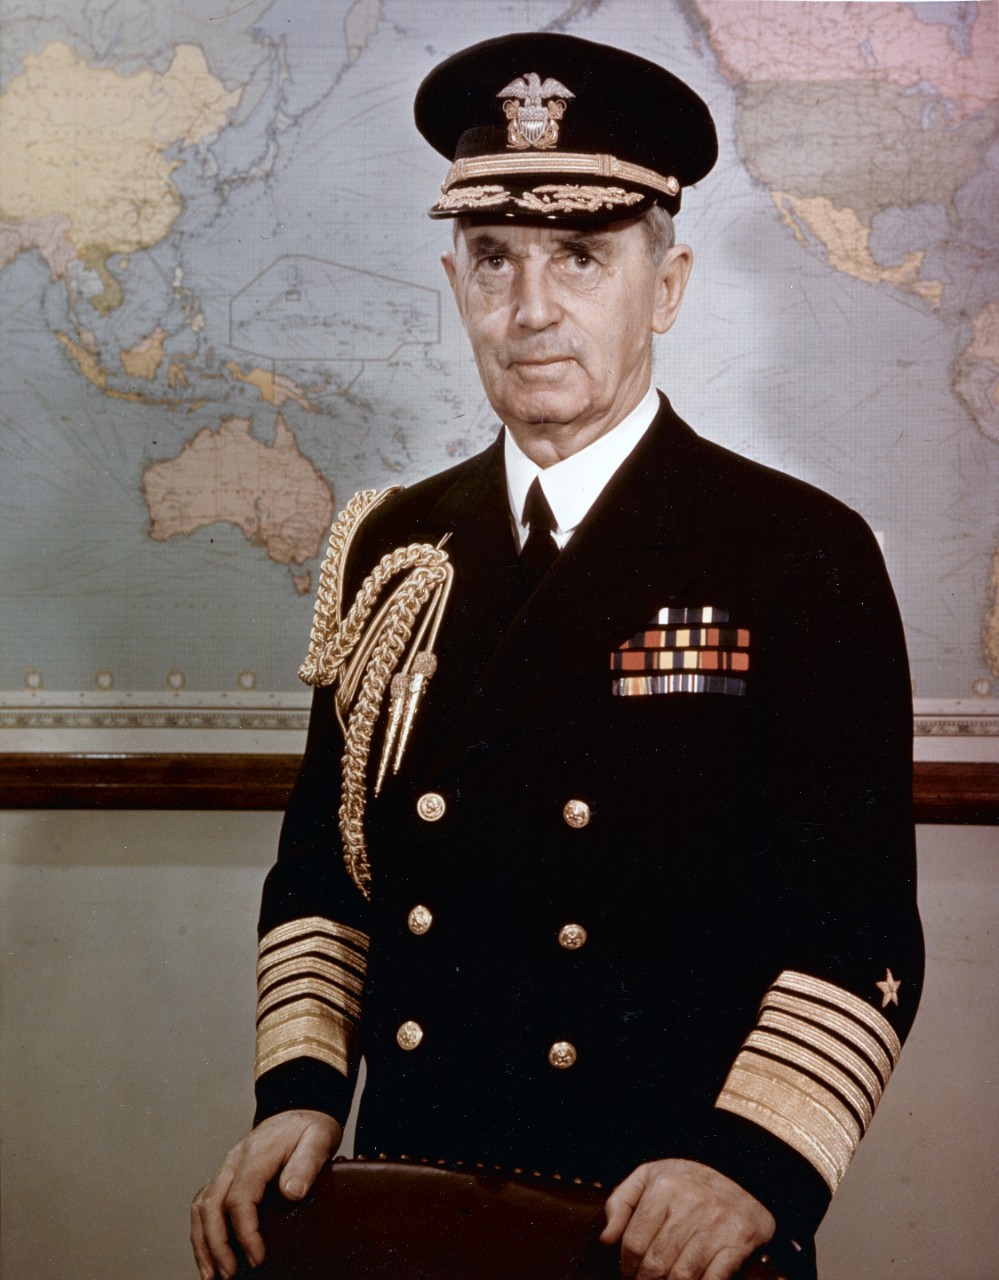 Photo #: 80-G-K-14447 Fleet Admiral William D. Leahy, USN, Chief of Staff to the President and Senior Member of the Joint Chiefs of Staff  